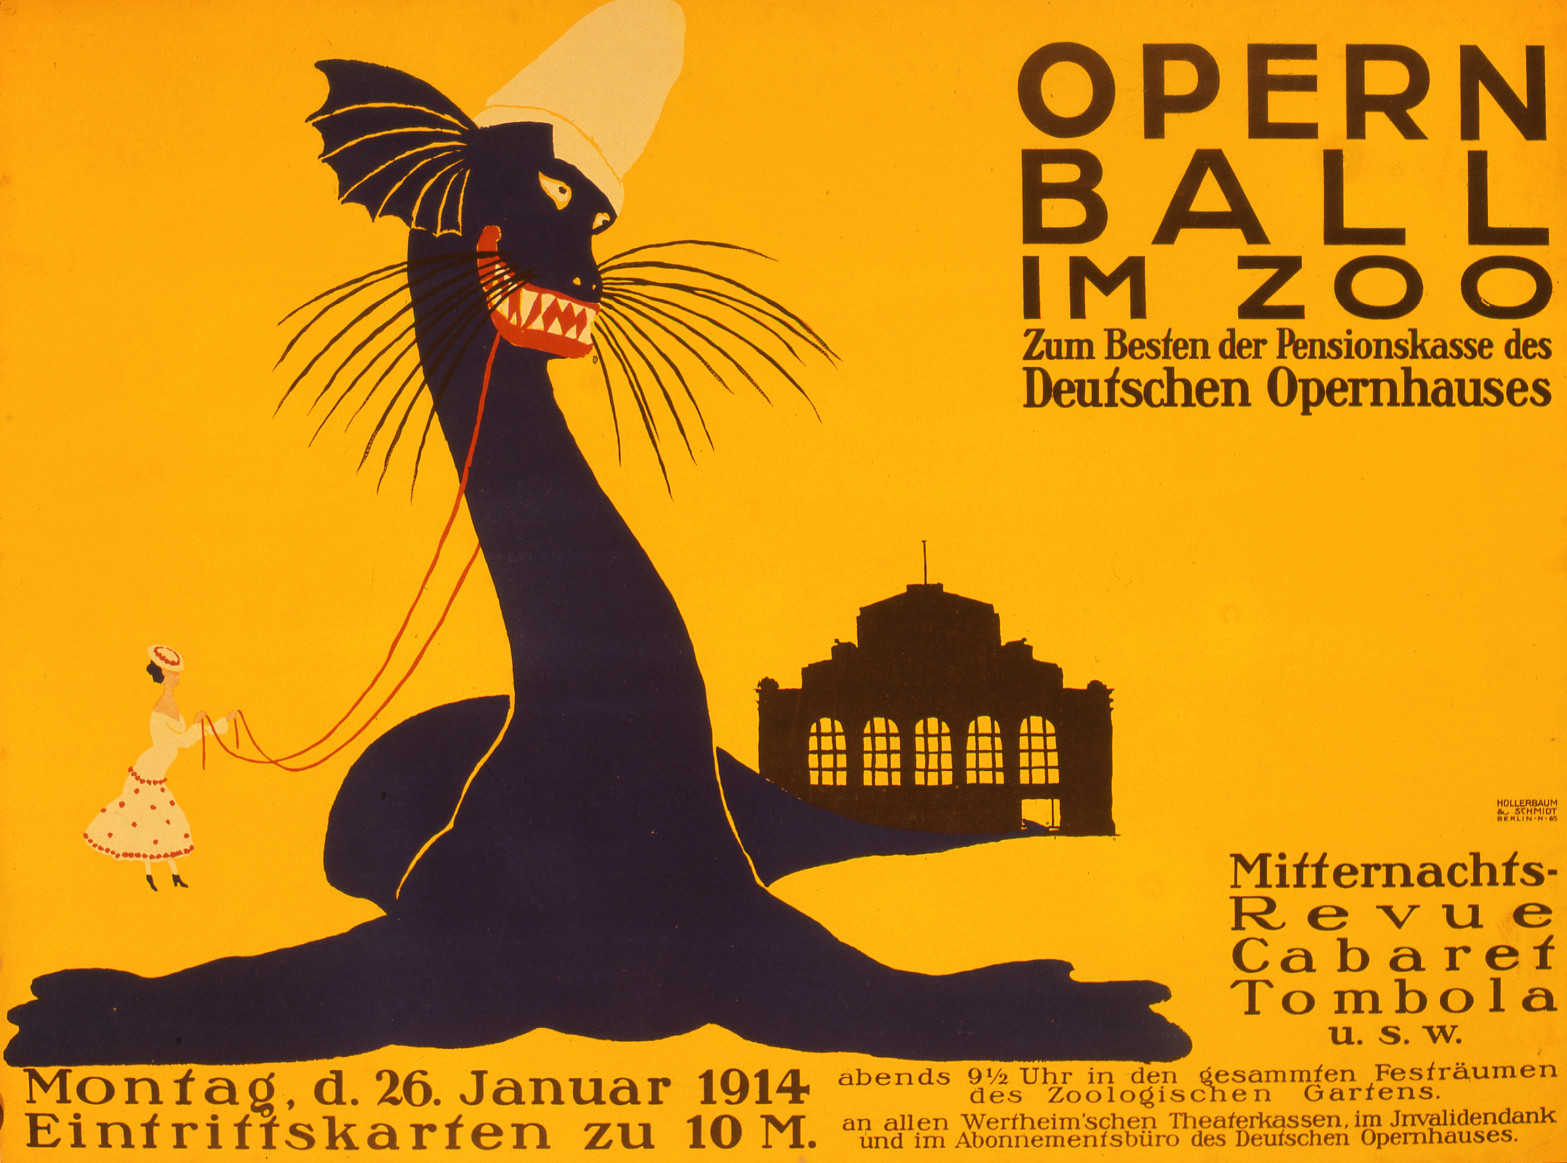 Yellow card with black fantasy dragon-like creature being held on reins by a small figure in a white spotted skirt. Text: Opera Ball at the Zoo: To Better the Pension Fund of the German Opera. Monday, 26 January 1914. Tickets for 10 M. Midnight revue, cabaret, tombola, etc. (…)